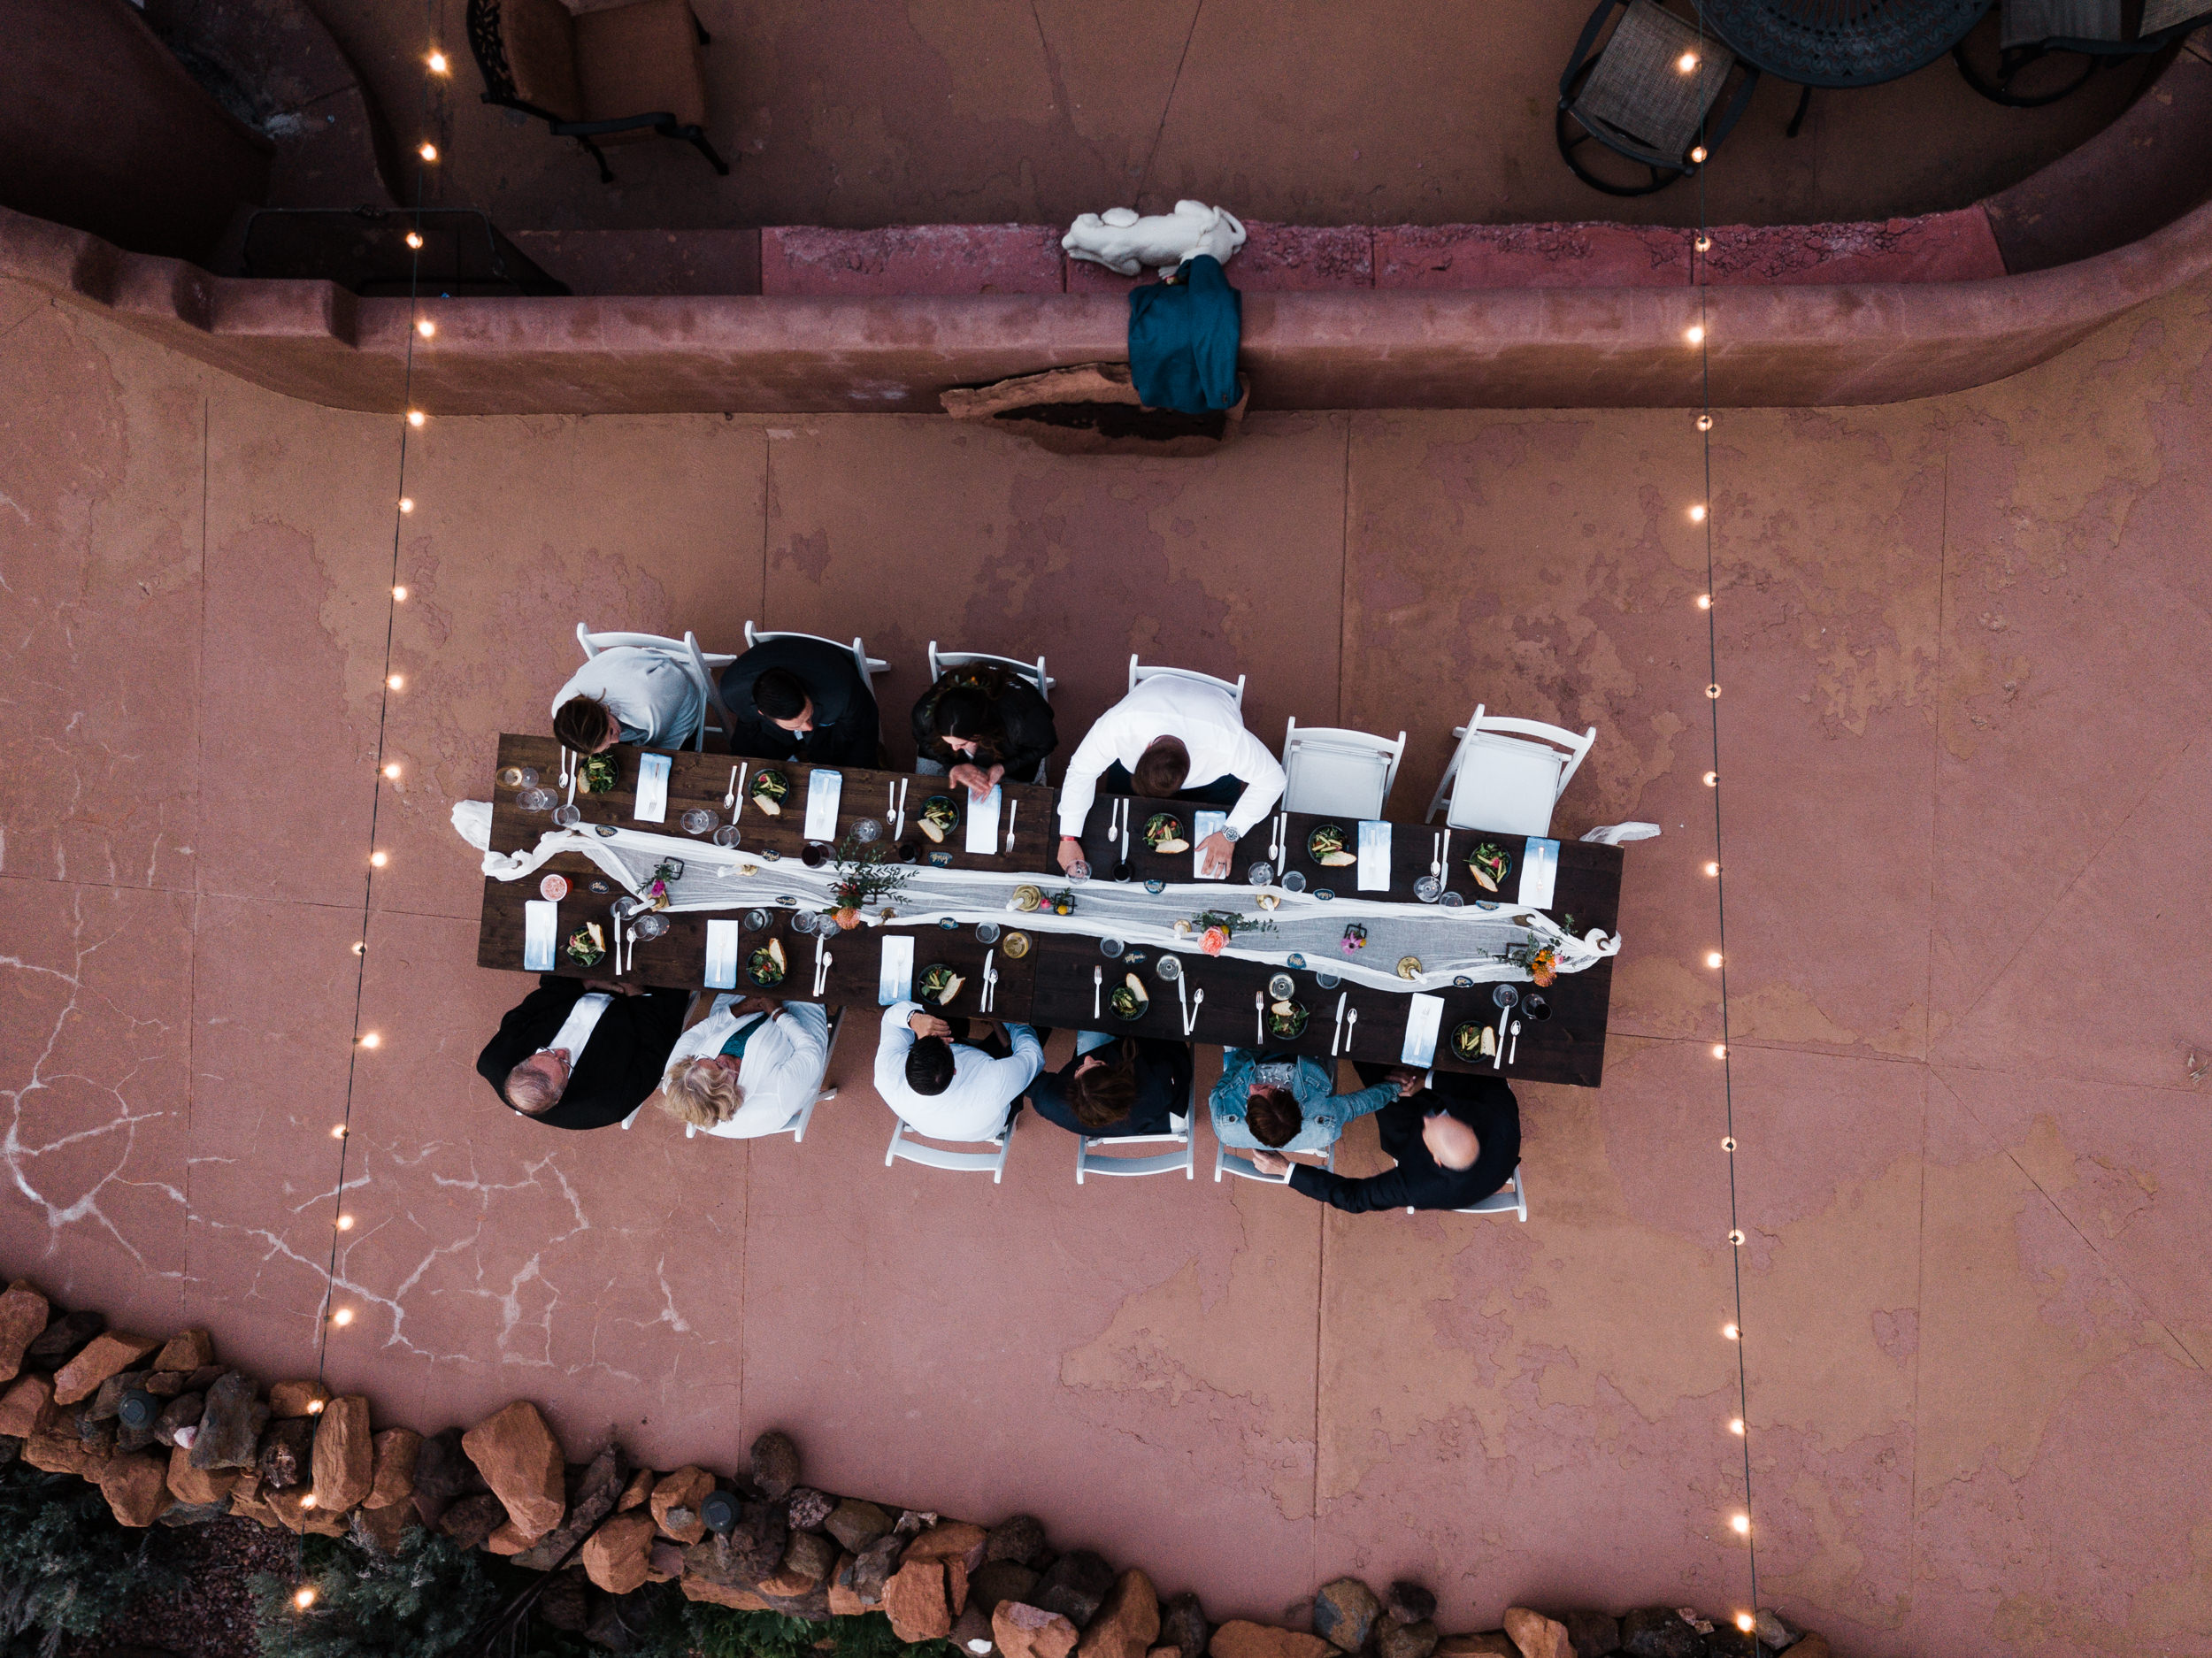 Zion national park elopement photographer | styled small wedding dinner reception in the desert | the hearnes adventure photography